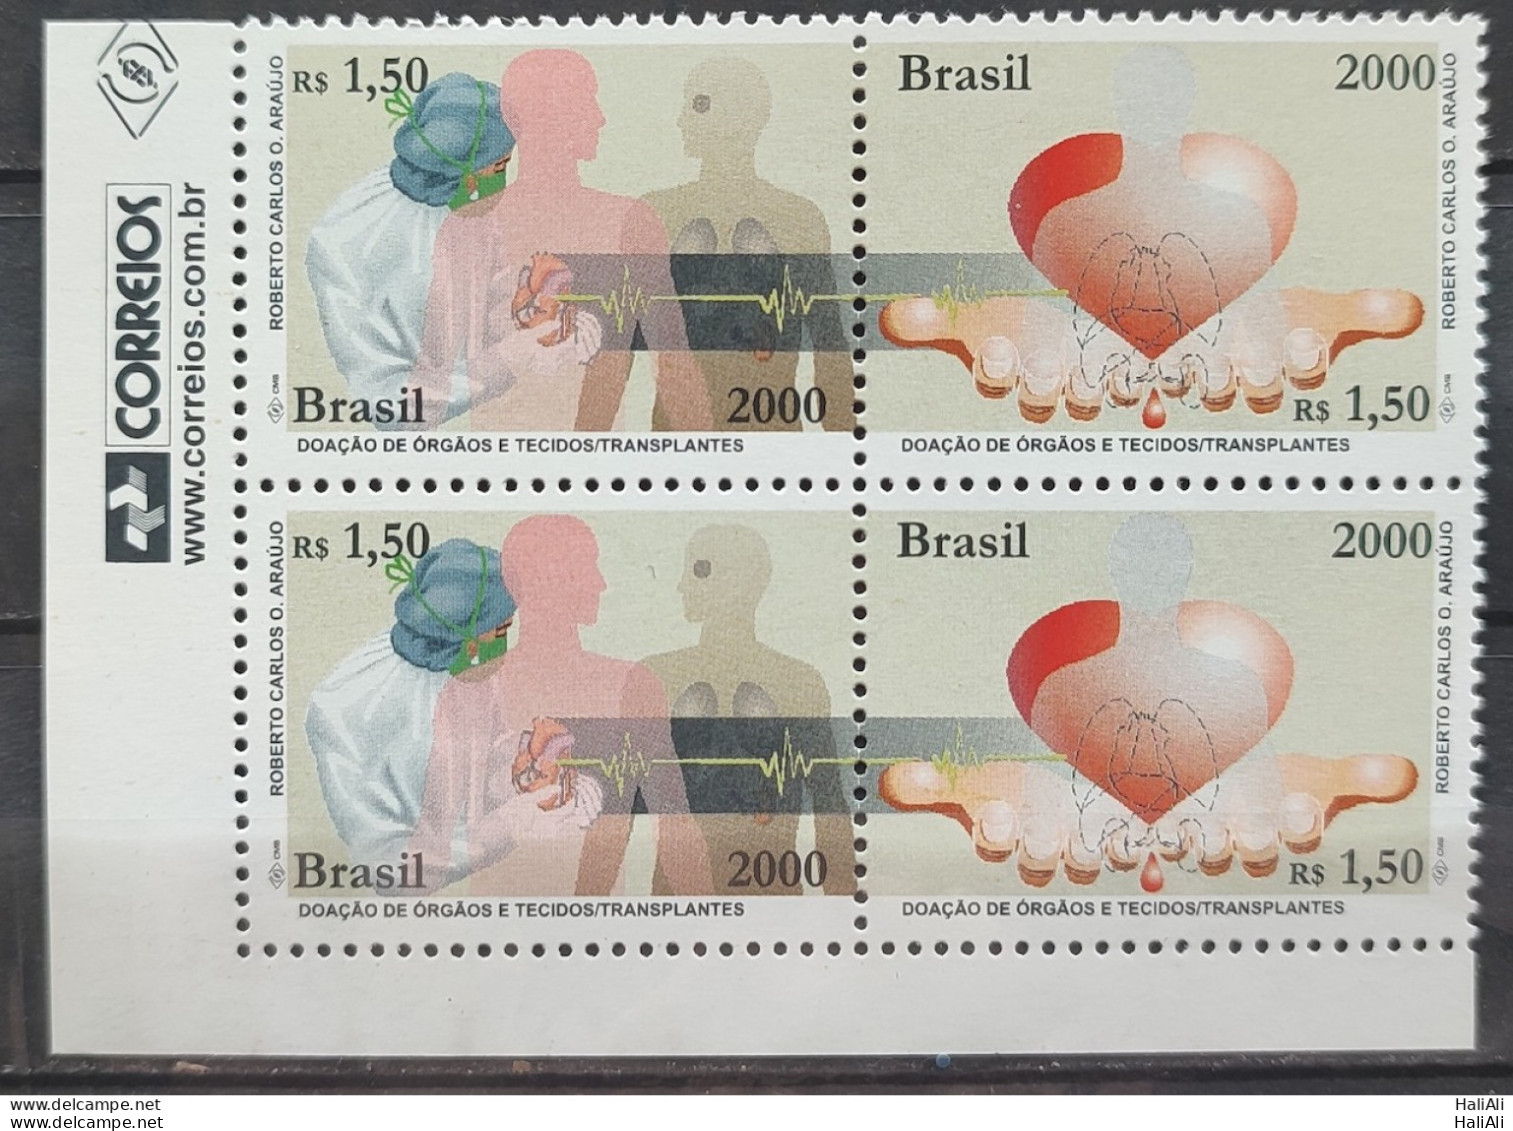 C 2341 Brazil Stamp Donation Of Organ And Tissues Science Health 2000 Block Of 4 Vignette Post Office - Unused Stamps